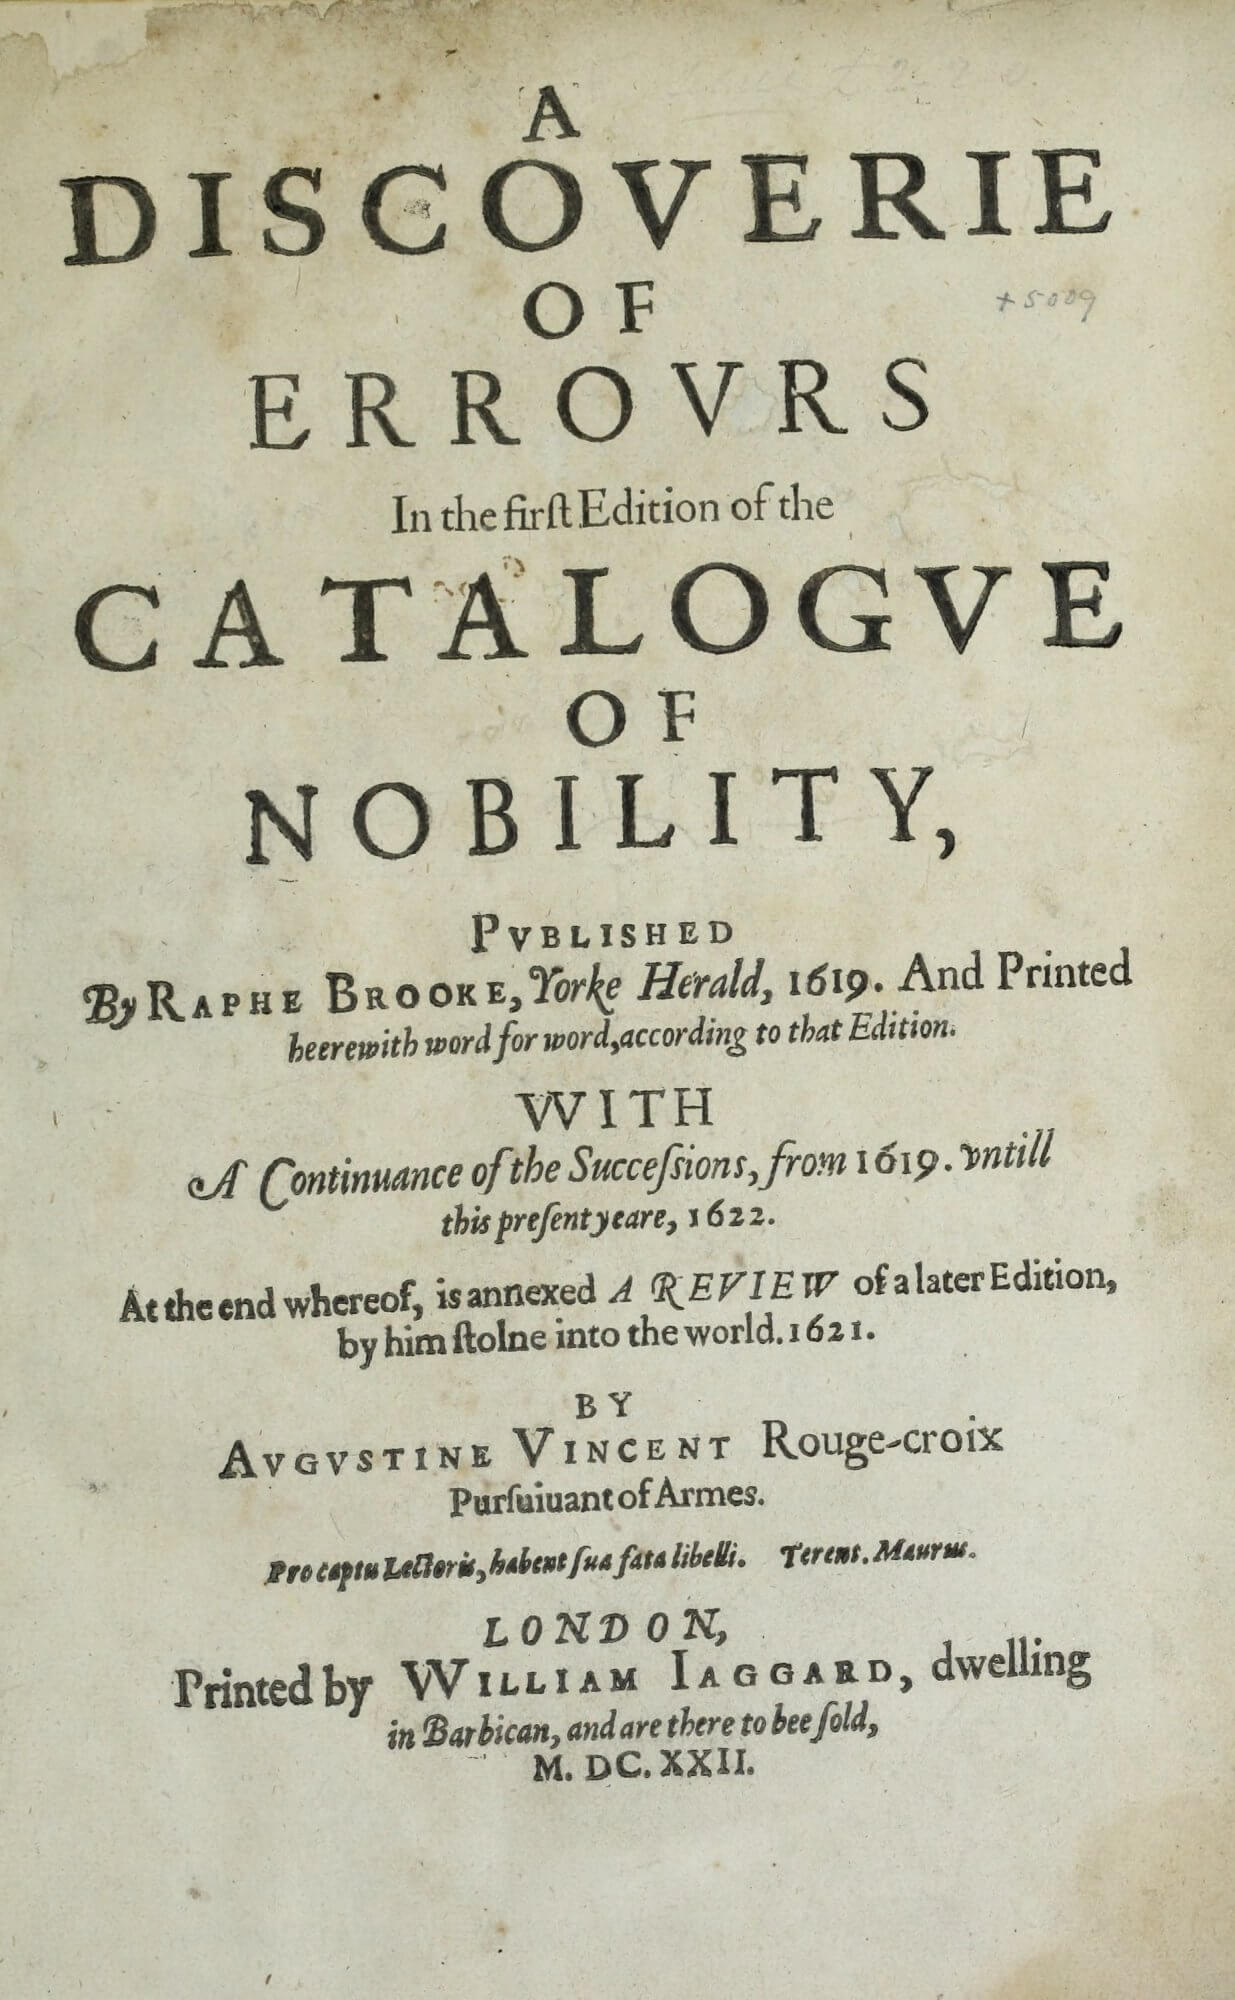 The title page of this work is a bit confusing, and lengthy, because it first names the author of the work in which mistakes have been discovered, before naming the author of this work.